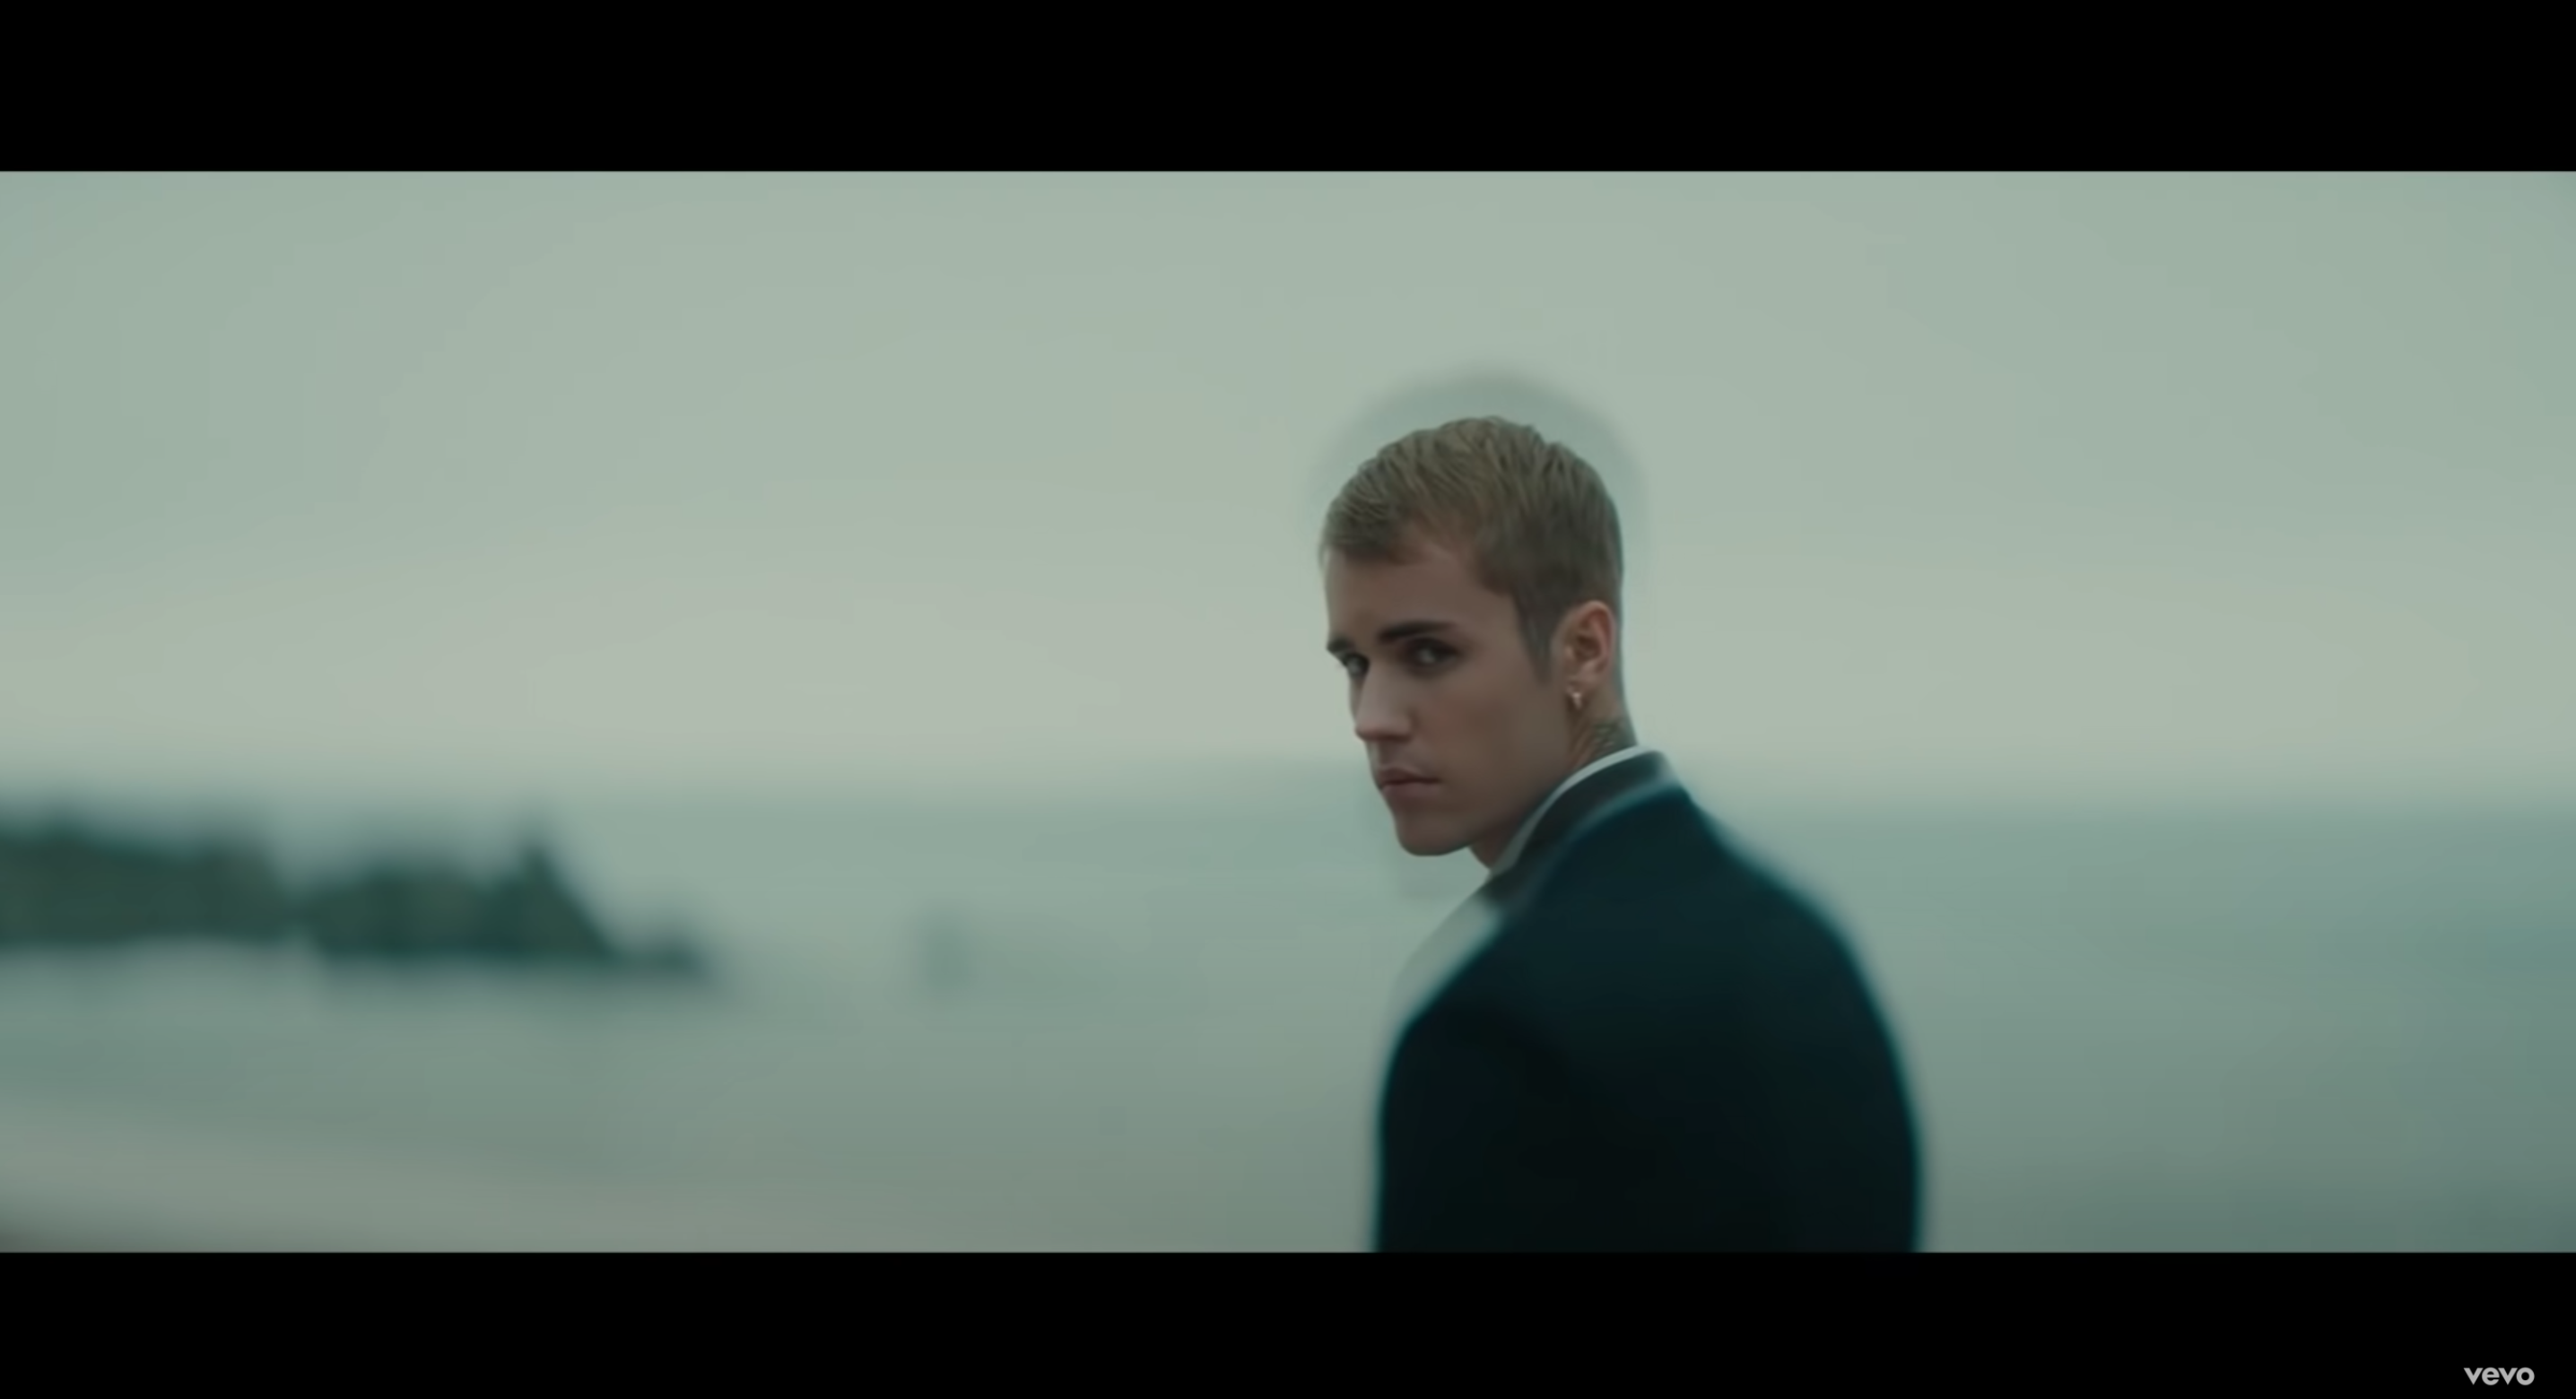 Justin Bieber digs deep in new music video 'GHOST' – The Connector